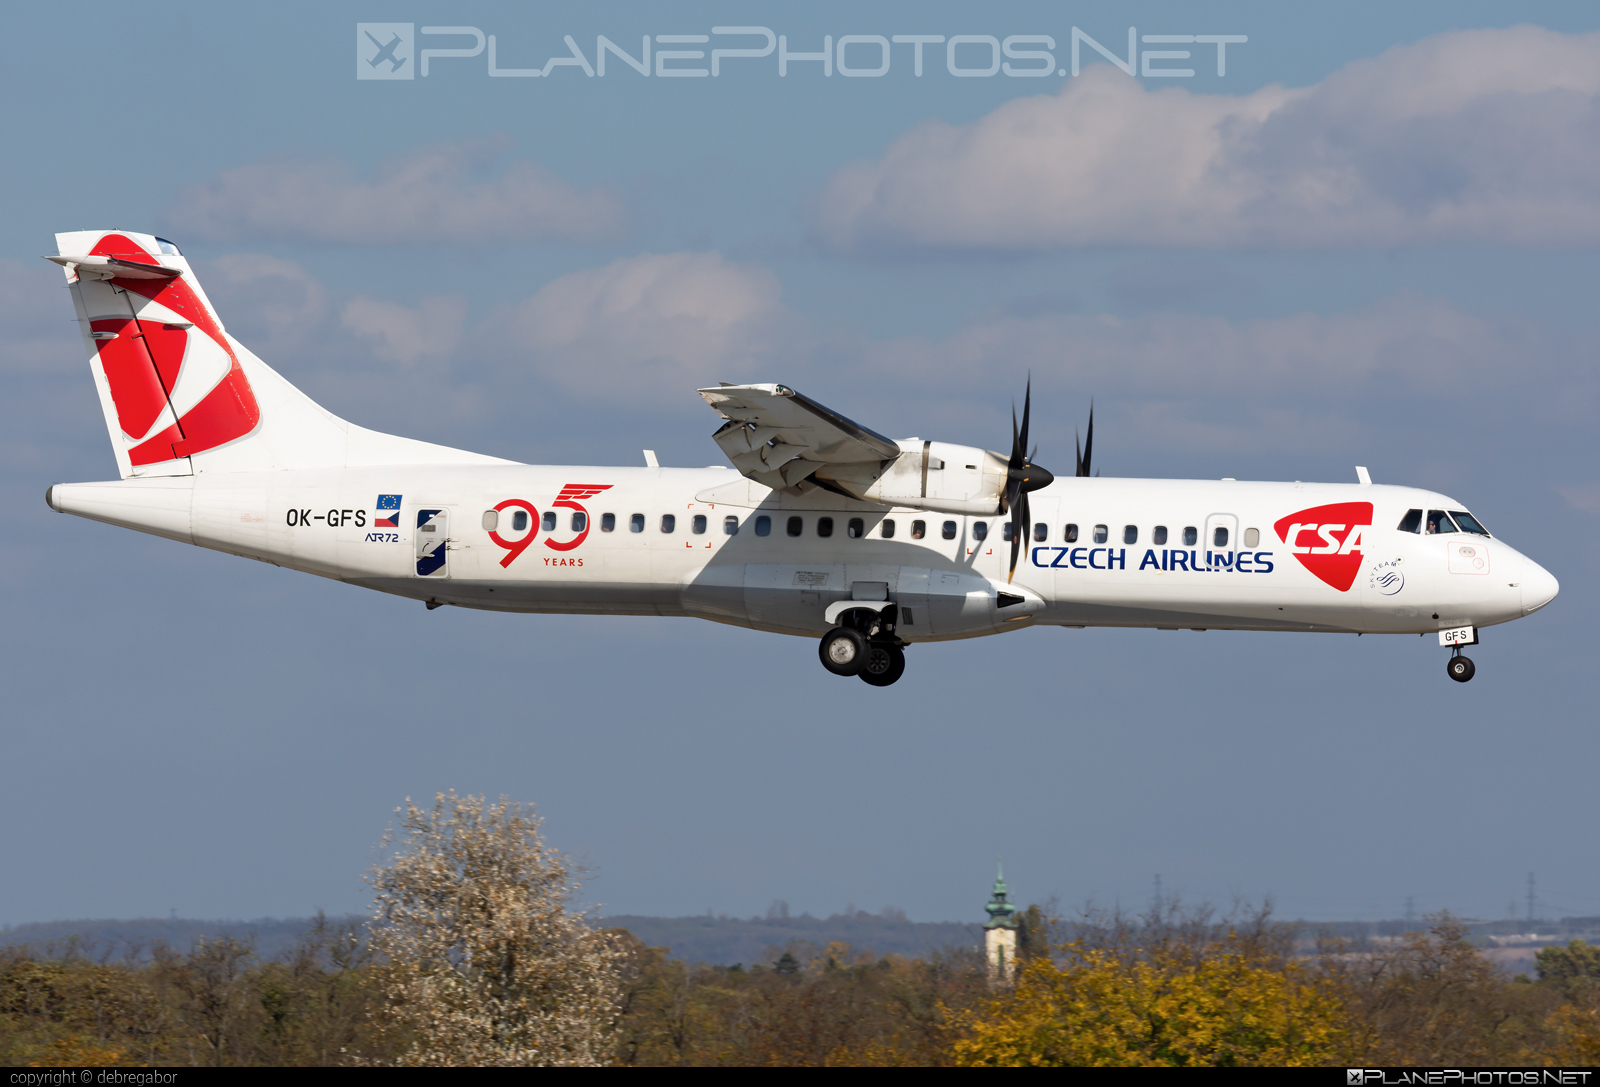 ATR 72-212A - OK-GFS operated by CSA Czech Airlines #atr #atr72 #atr72212a #atr72500 #csa #czechairlines